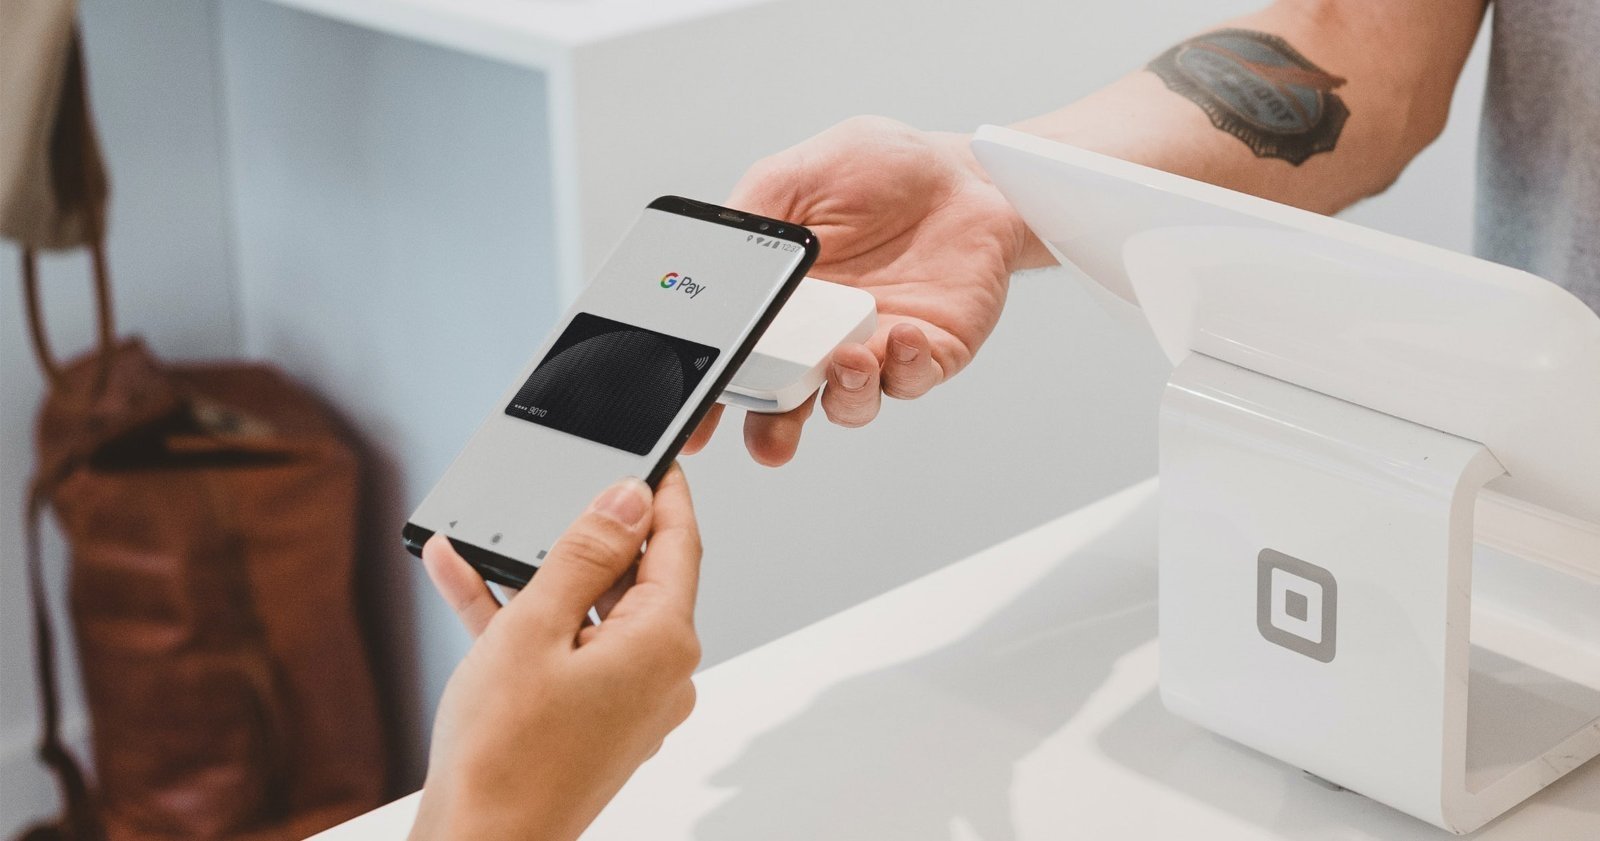 Mobile payments with Google Pay